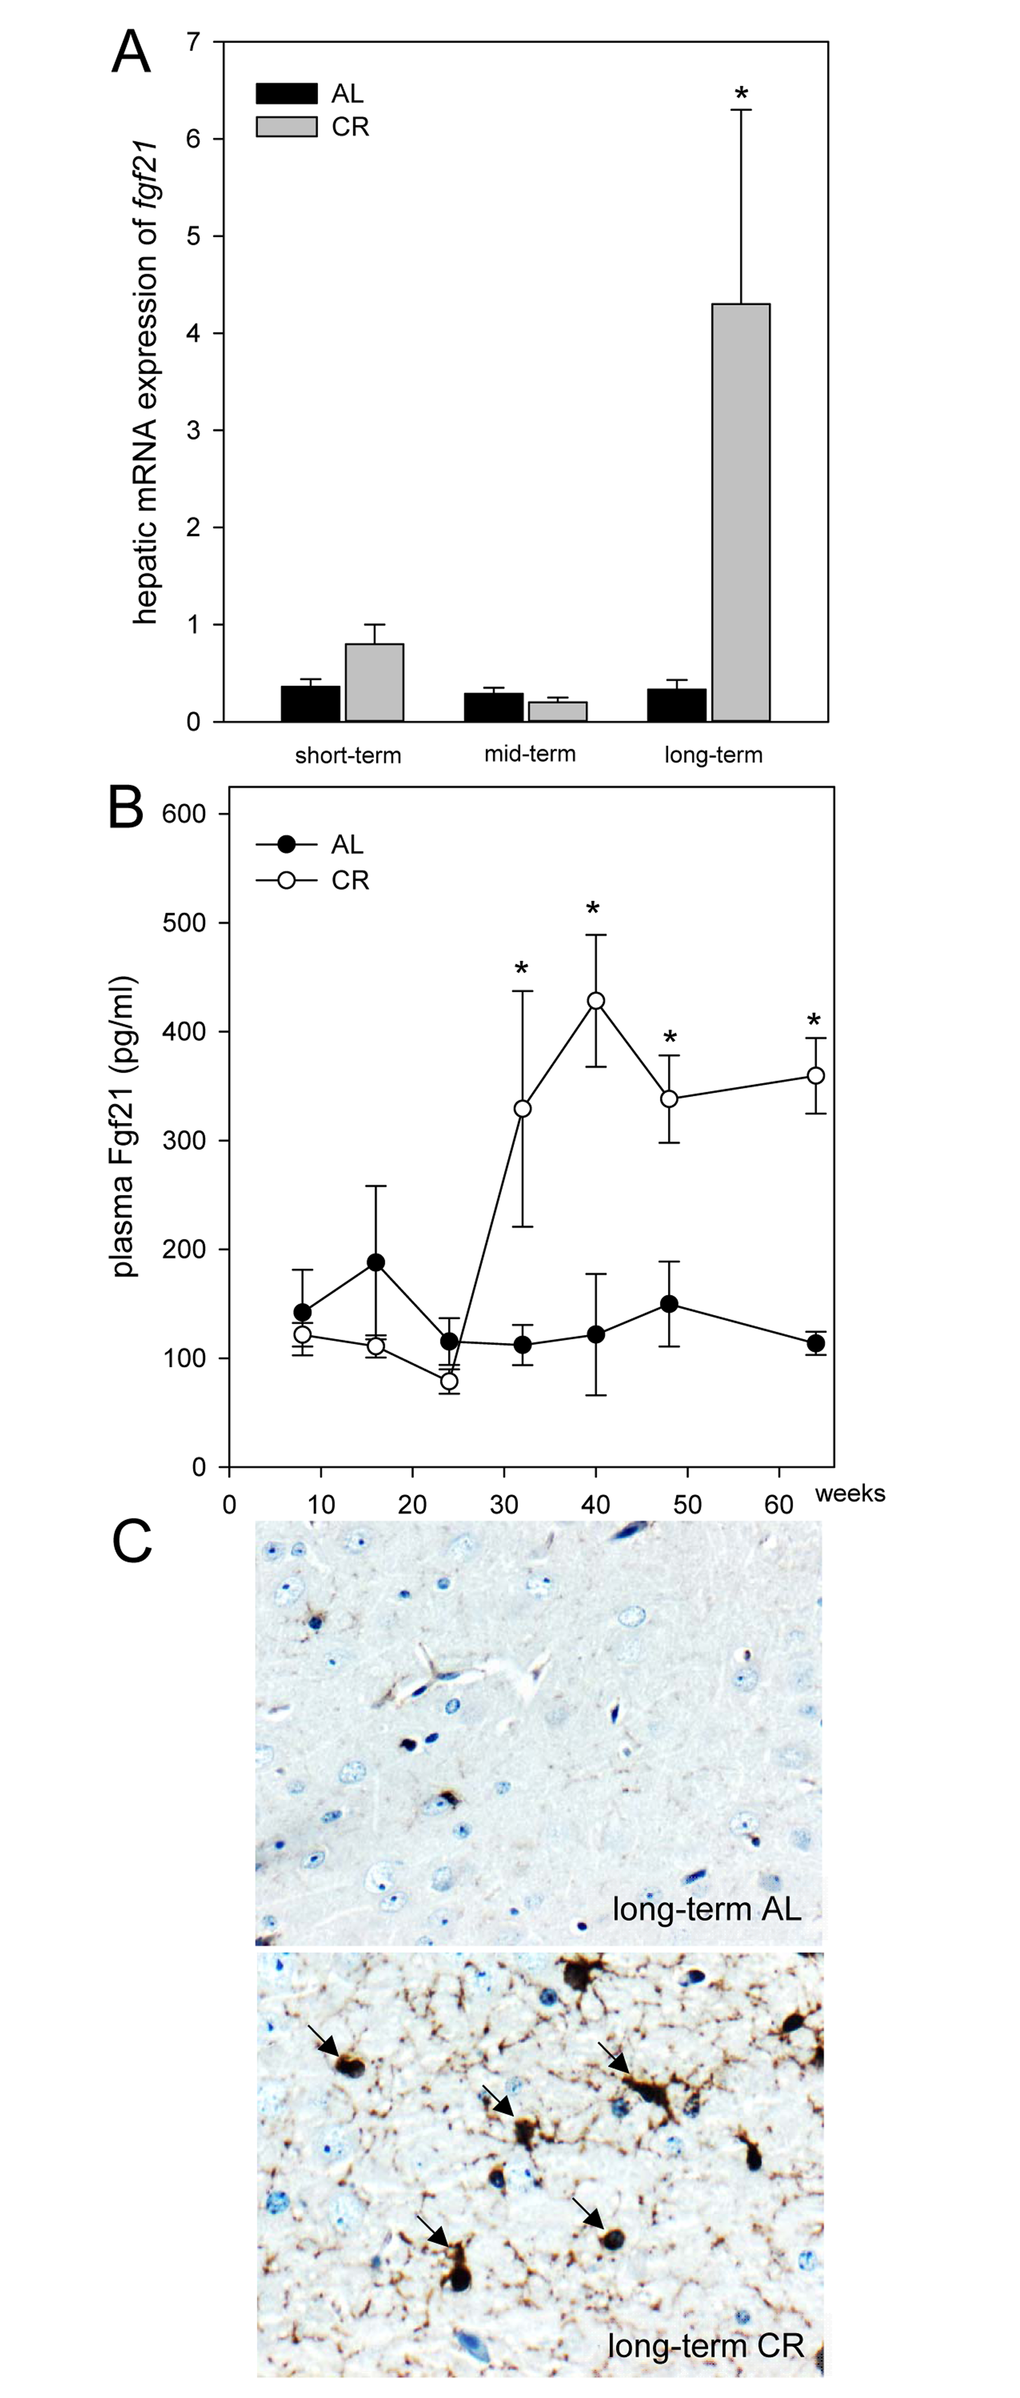 (A) Quantitative real-time PCR analysis of hepatic mRNA expression of fgf21 and (B) quantitative analysis of plasma Fgf21 of ApoE-/- mice. Mice were fed either ad libitum (AL) or caloric-restricted (CR, 60% of ad libitum) for a short-term (4 weeks; n=14), mid-term (20 weeks; n=14) or long-term (64 weeks; n=14). At weeks 8, 16, 24, 32, 40, 48 and 64 plasma Fgf21 was measured. Signals were corrected to that of RPS18. Representative immunohistochemical images (C, original magnification x400) of Fgf21 accumulation in brain of long-term AL- (upper panel) and CR-fed ApoE-/- mice (lower panel) mice. Values are given as means ± SEM; ANOVA, post-hoc pairwise comparison tests.* p 